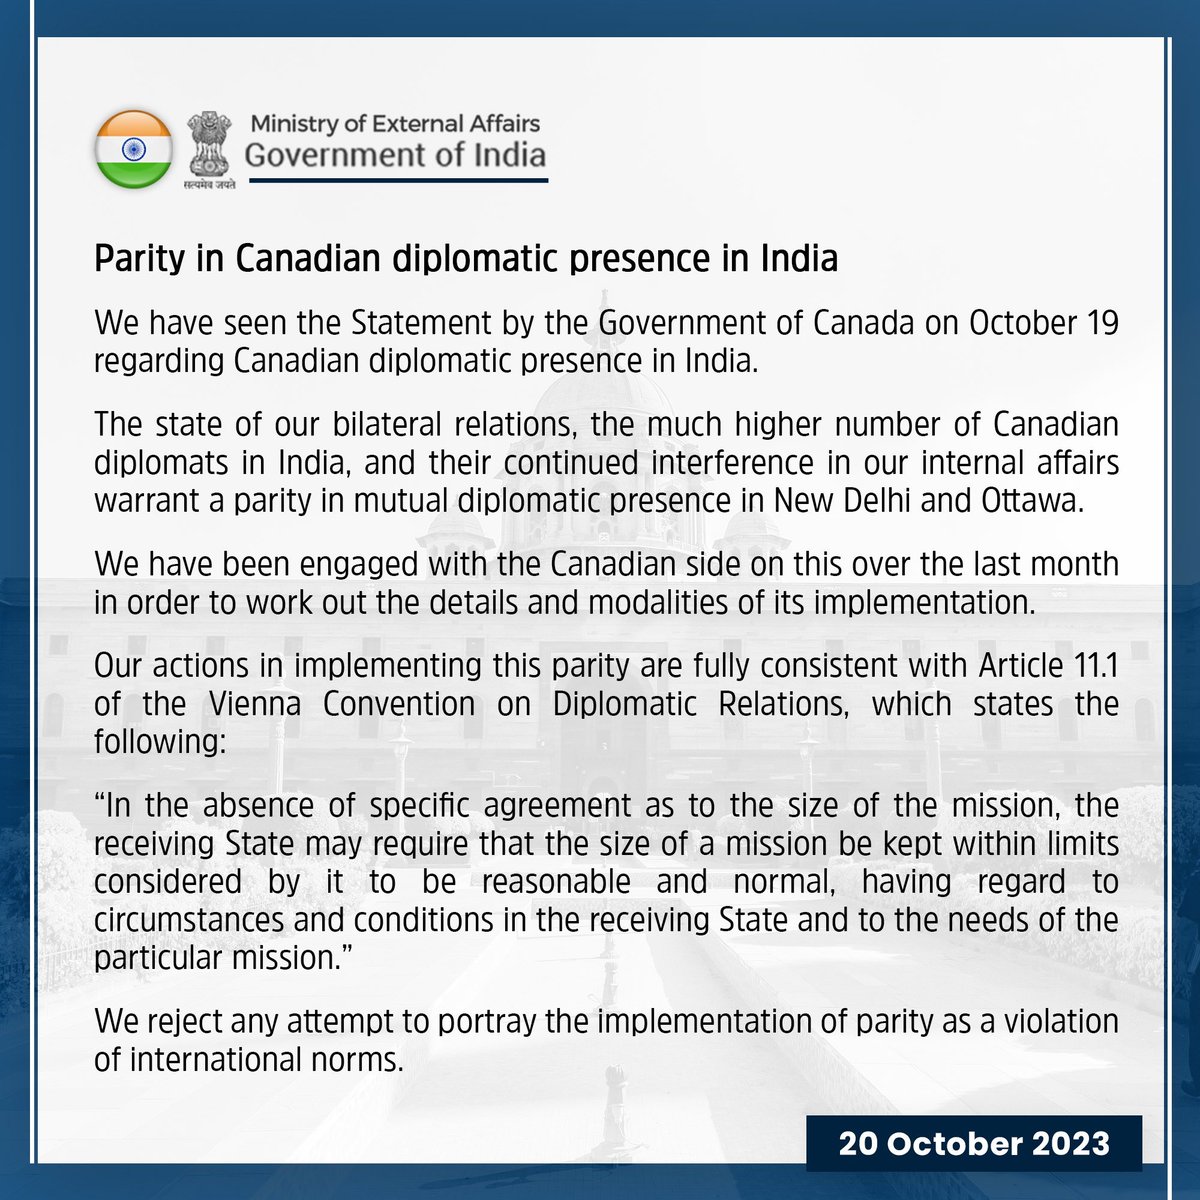 India rejects Canada's allegations of violating Vienna Convention on Diplomatic Relations by expelling 41 diplomats. @MEAIndia cites Article 11.1
#IndiaCanada #IndiaCanadaRow